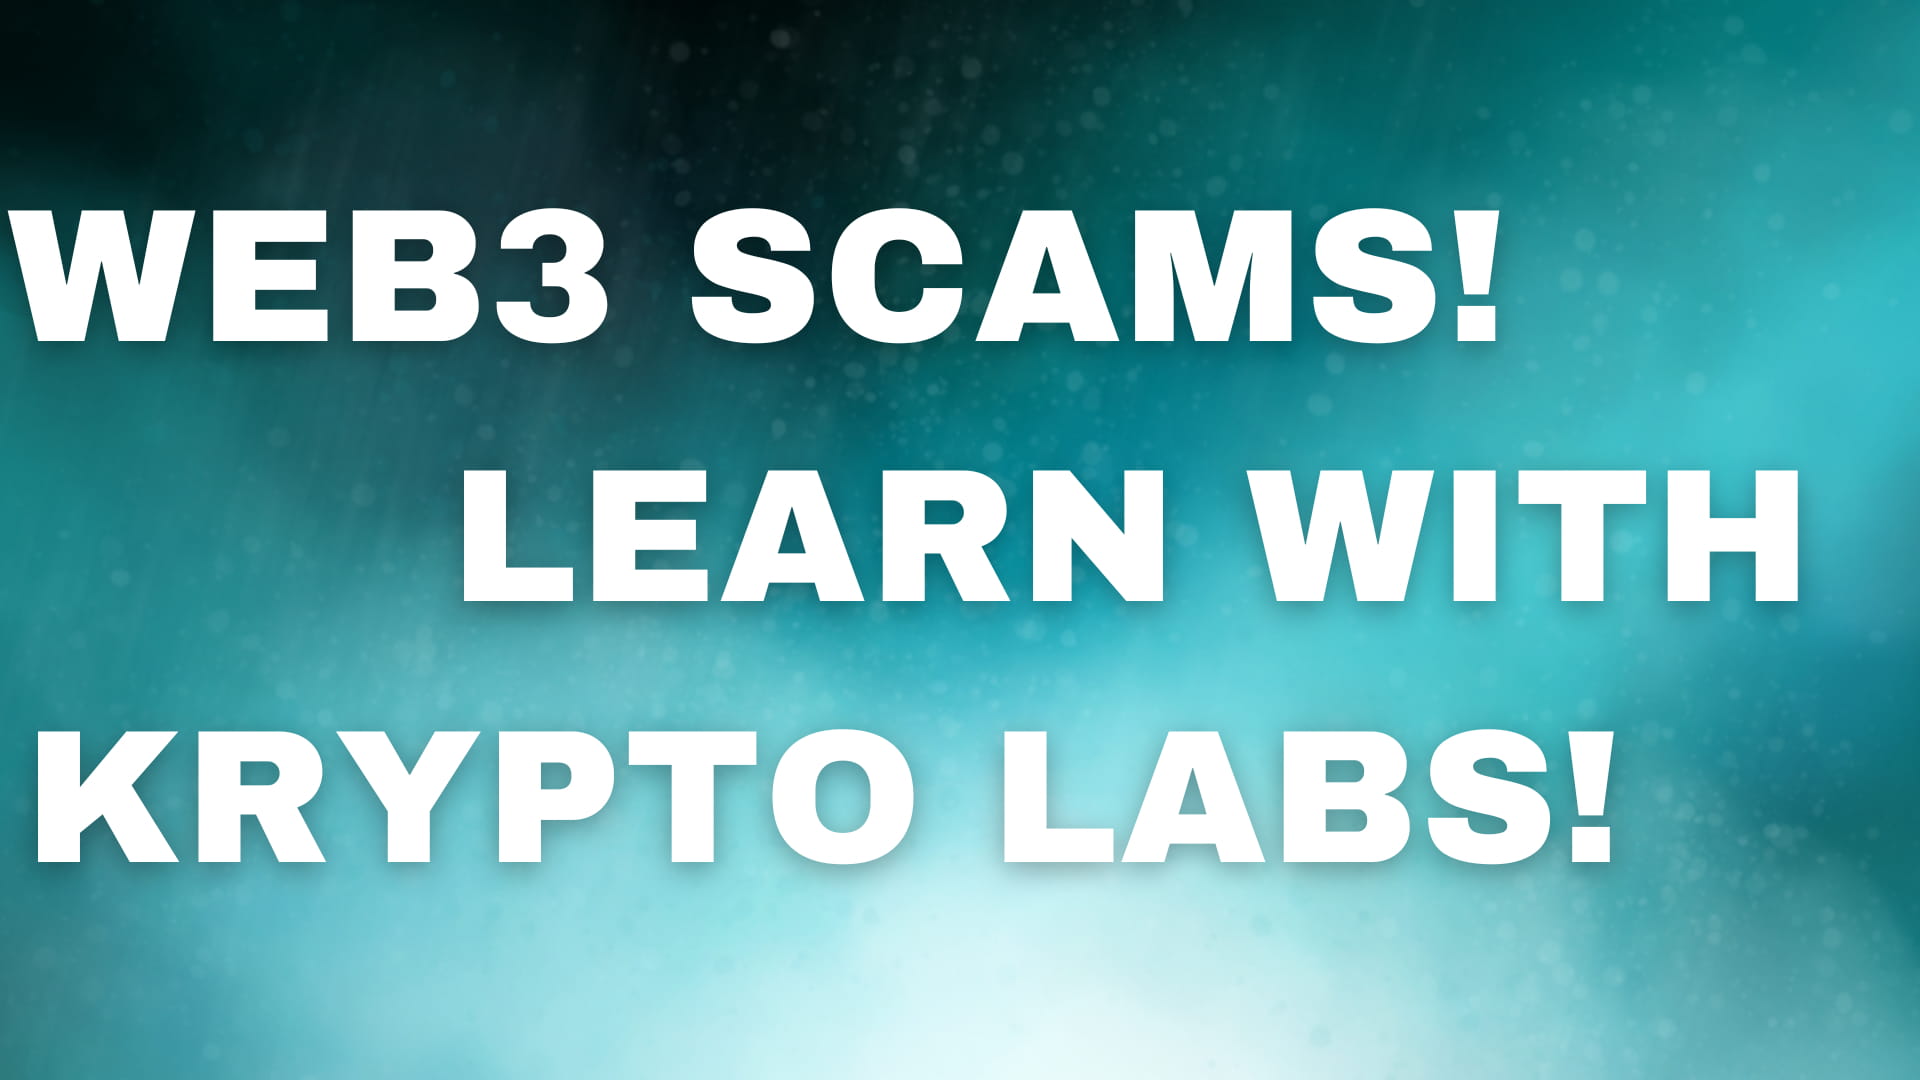 WEB3 SCAMS! - LEARN WITH KRYPTO LABS